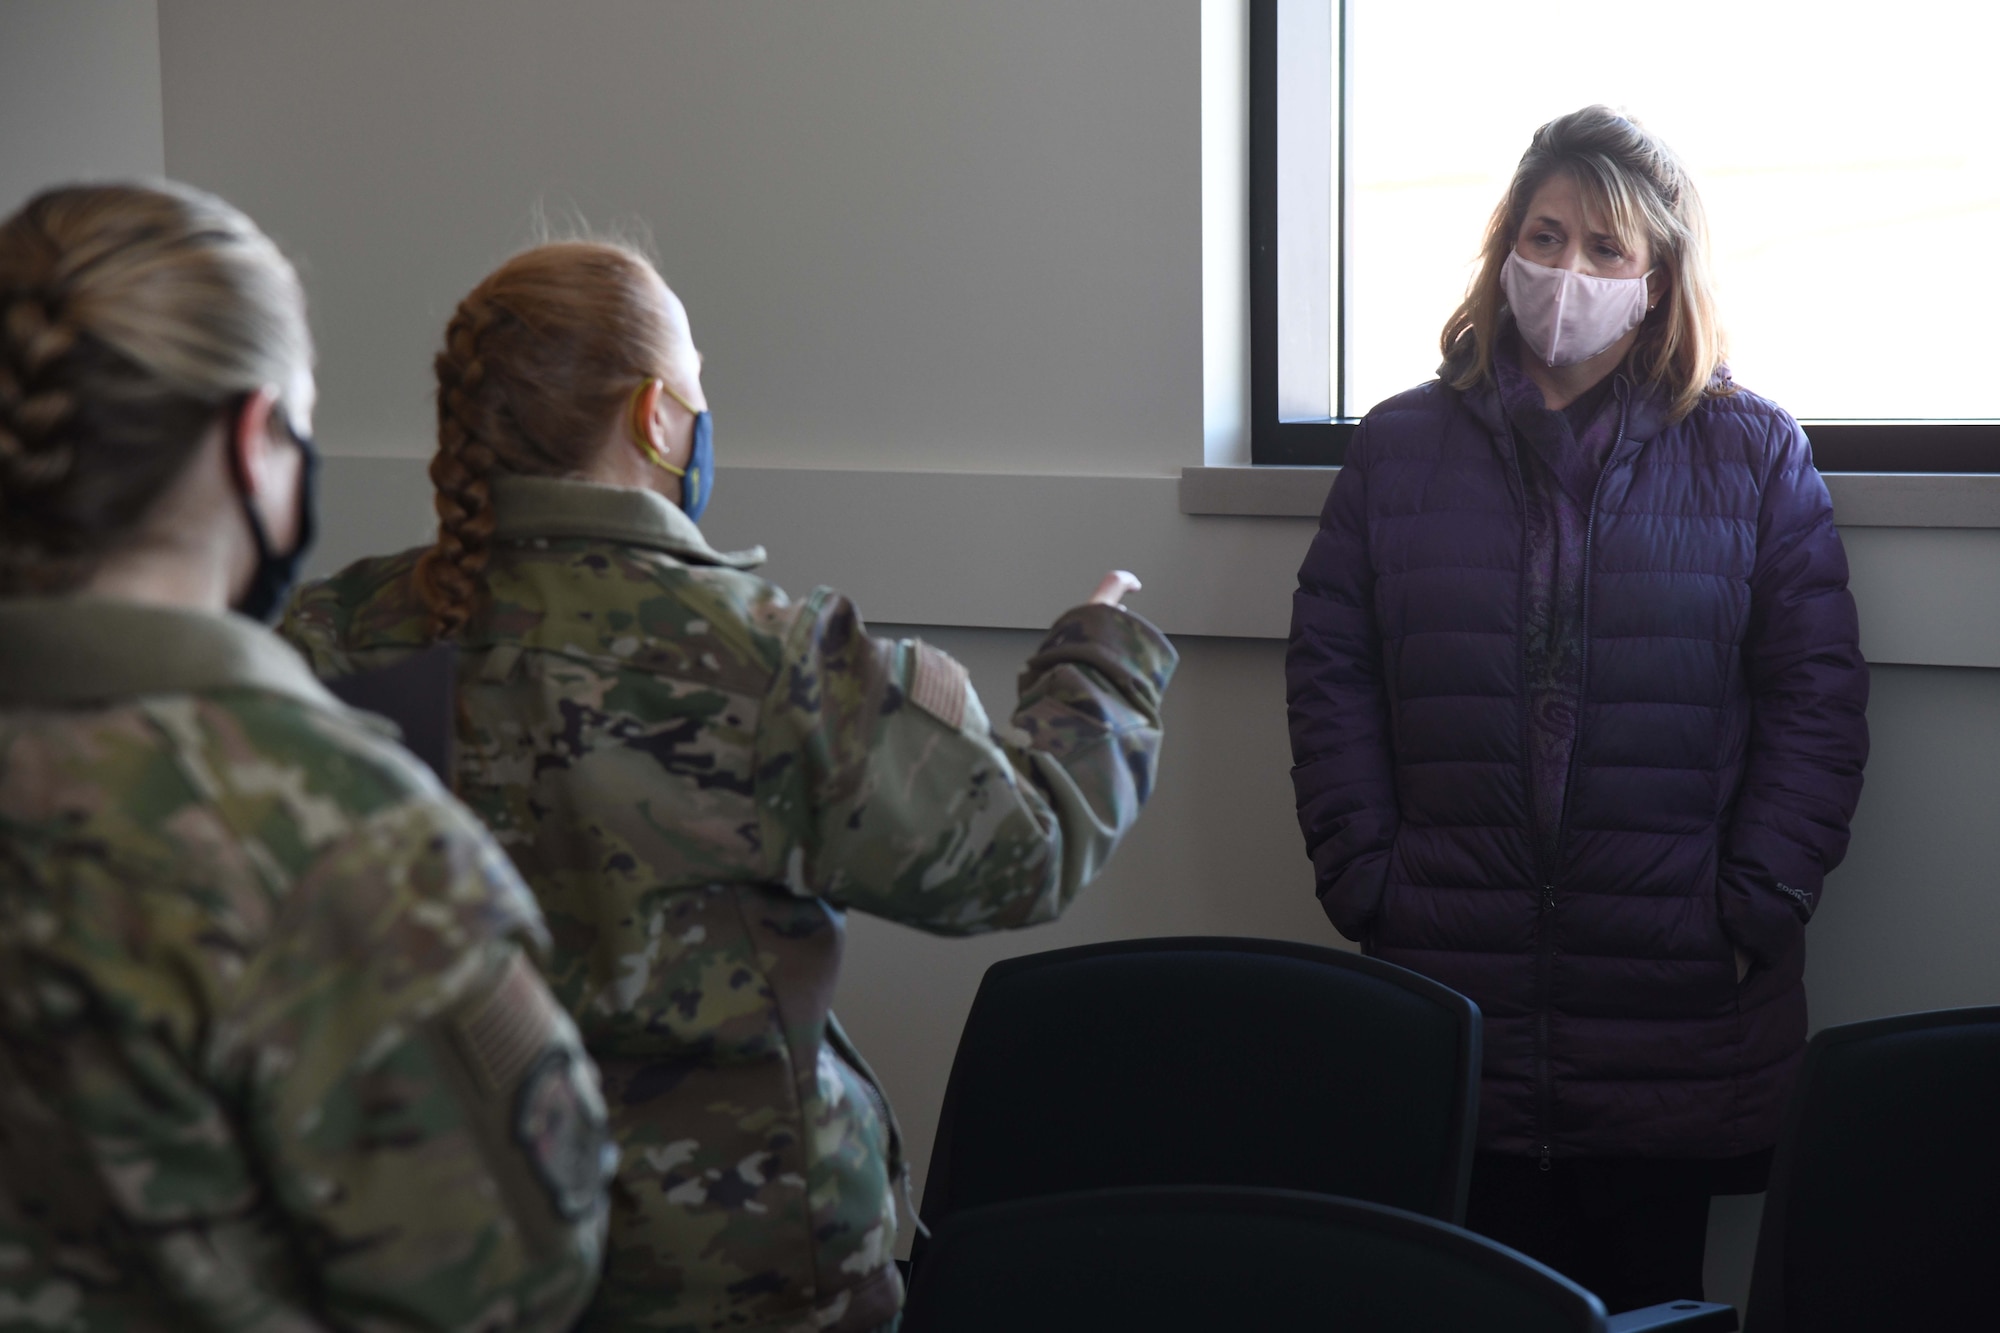 Ms. Cheryl Ulmer, regional director for U.S. Senator Jon Tester (front), speaks with Col. Anita Feugate Opperman (right), 341st Missile Wing commander, and Lt. Col. Michelle Sterling (left), 341st Civil Engineering Squadron commander, Feb. 18, 2021, at Malmstrom Air Force Base, Mont.